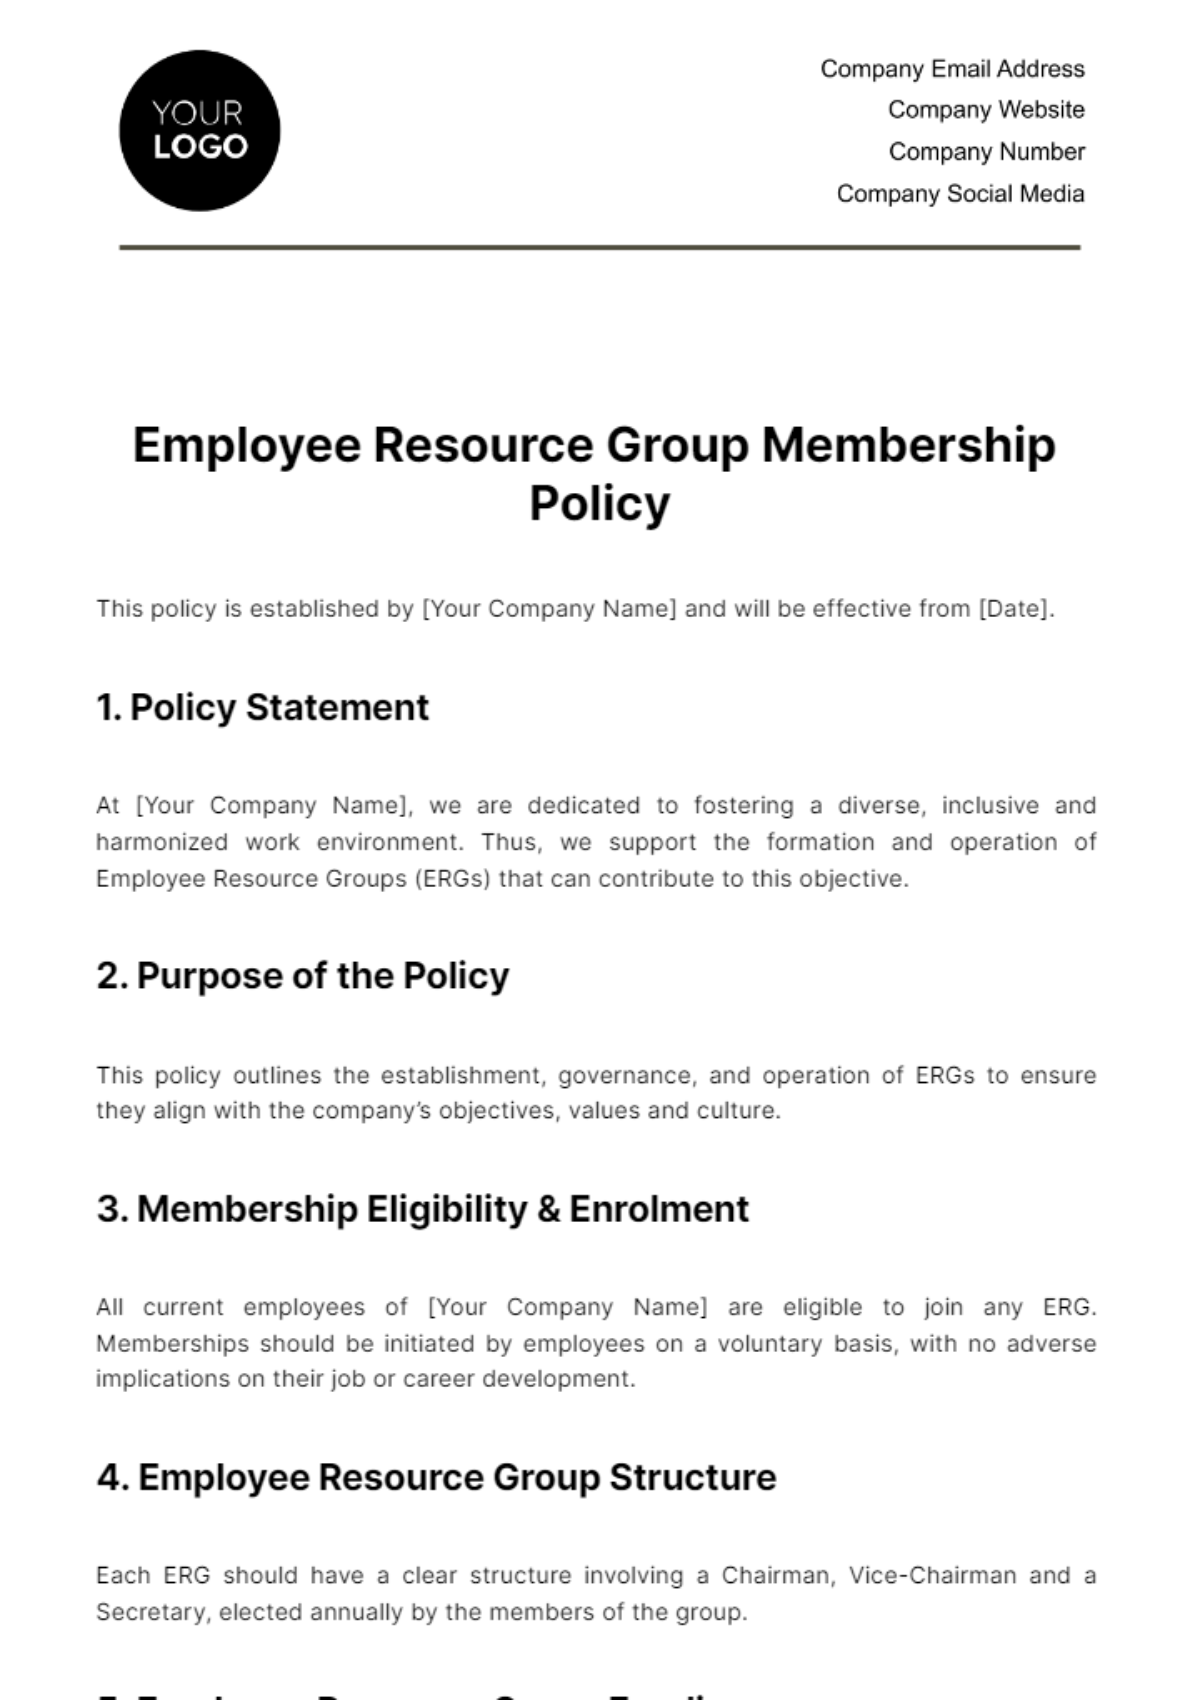 Employee Resource Group Membership Policy HR Template